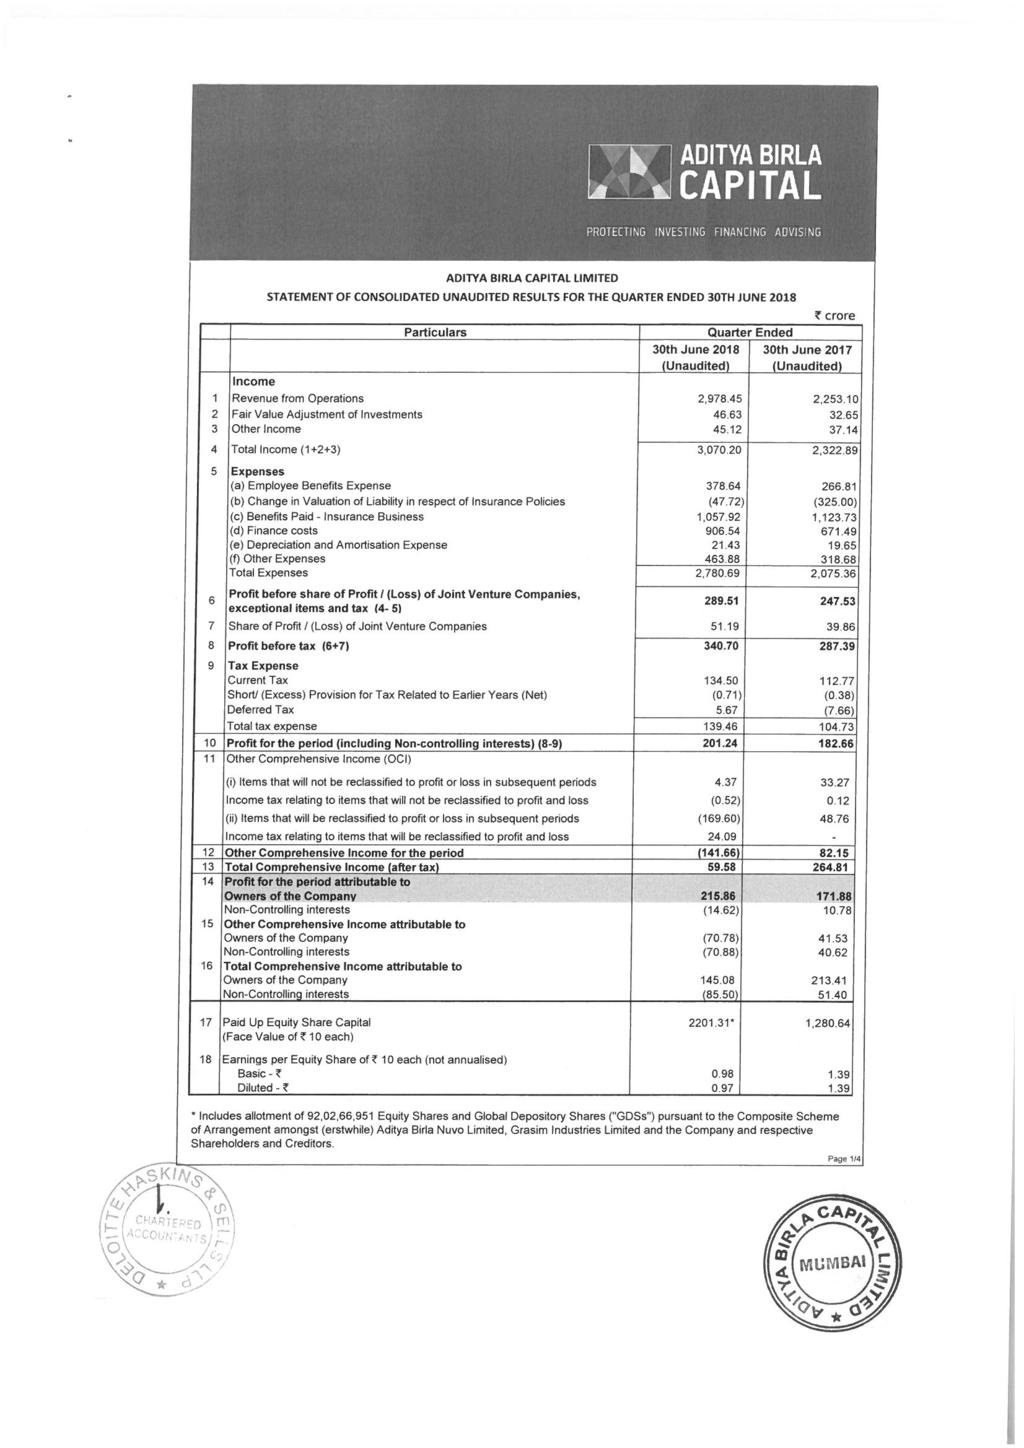 ADITYA BIRLA CAPITAL PROTECTING INVESTING FINANCING ADVISING 1 2 3 4 5 6 7 8 9 Income ADITYA BIRLA CAPITAL LIMITED STATEMENT OF CONSOLIDATED UNAUDITED RESULTS FOR THE QUARTER ENDED 30TH JUNE 2018